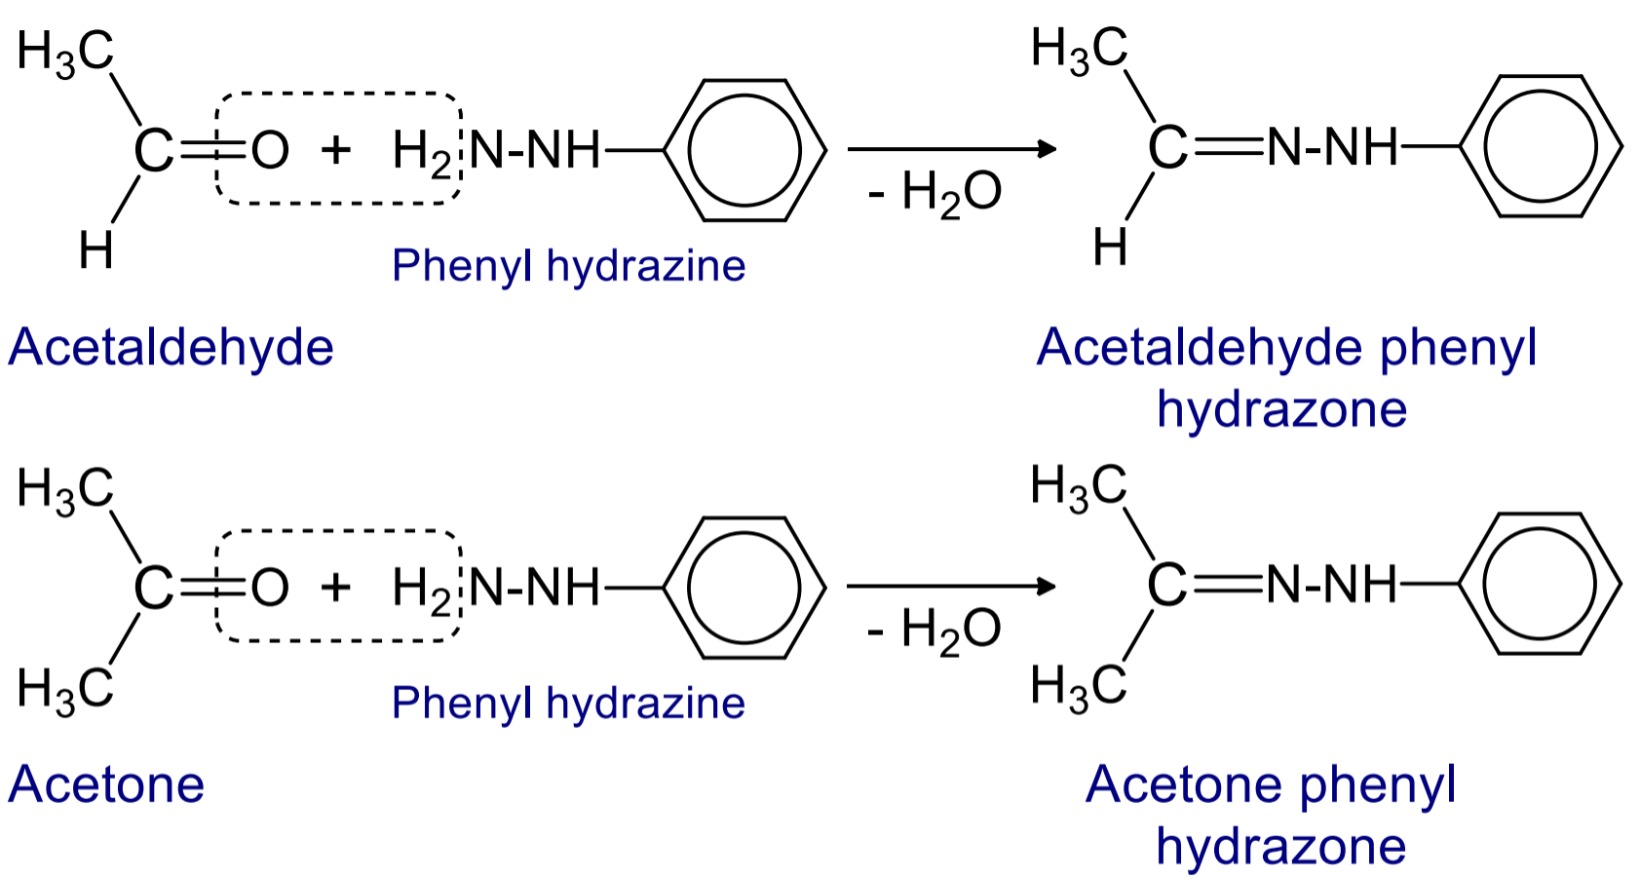 When aldehyde and ketone reacts with phenyl hydrazine then phenylhydrazone are formed.